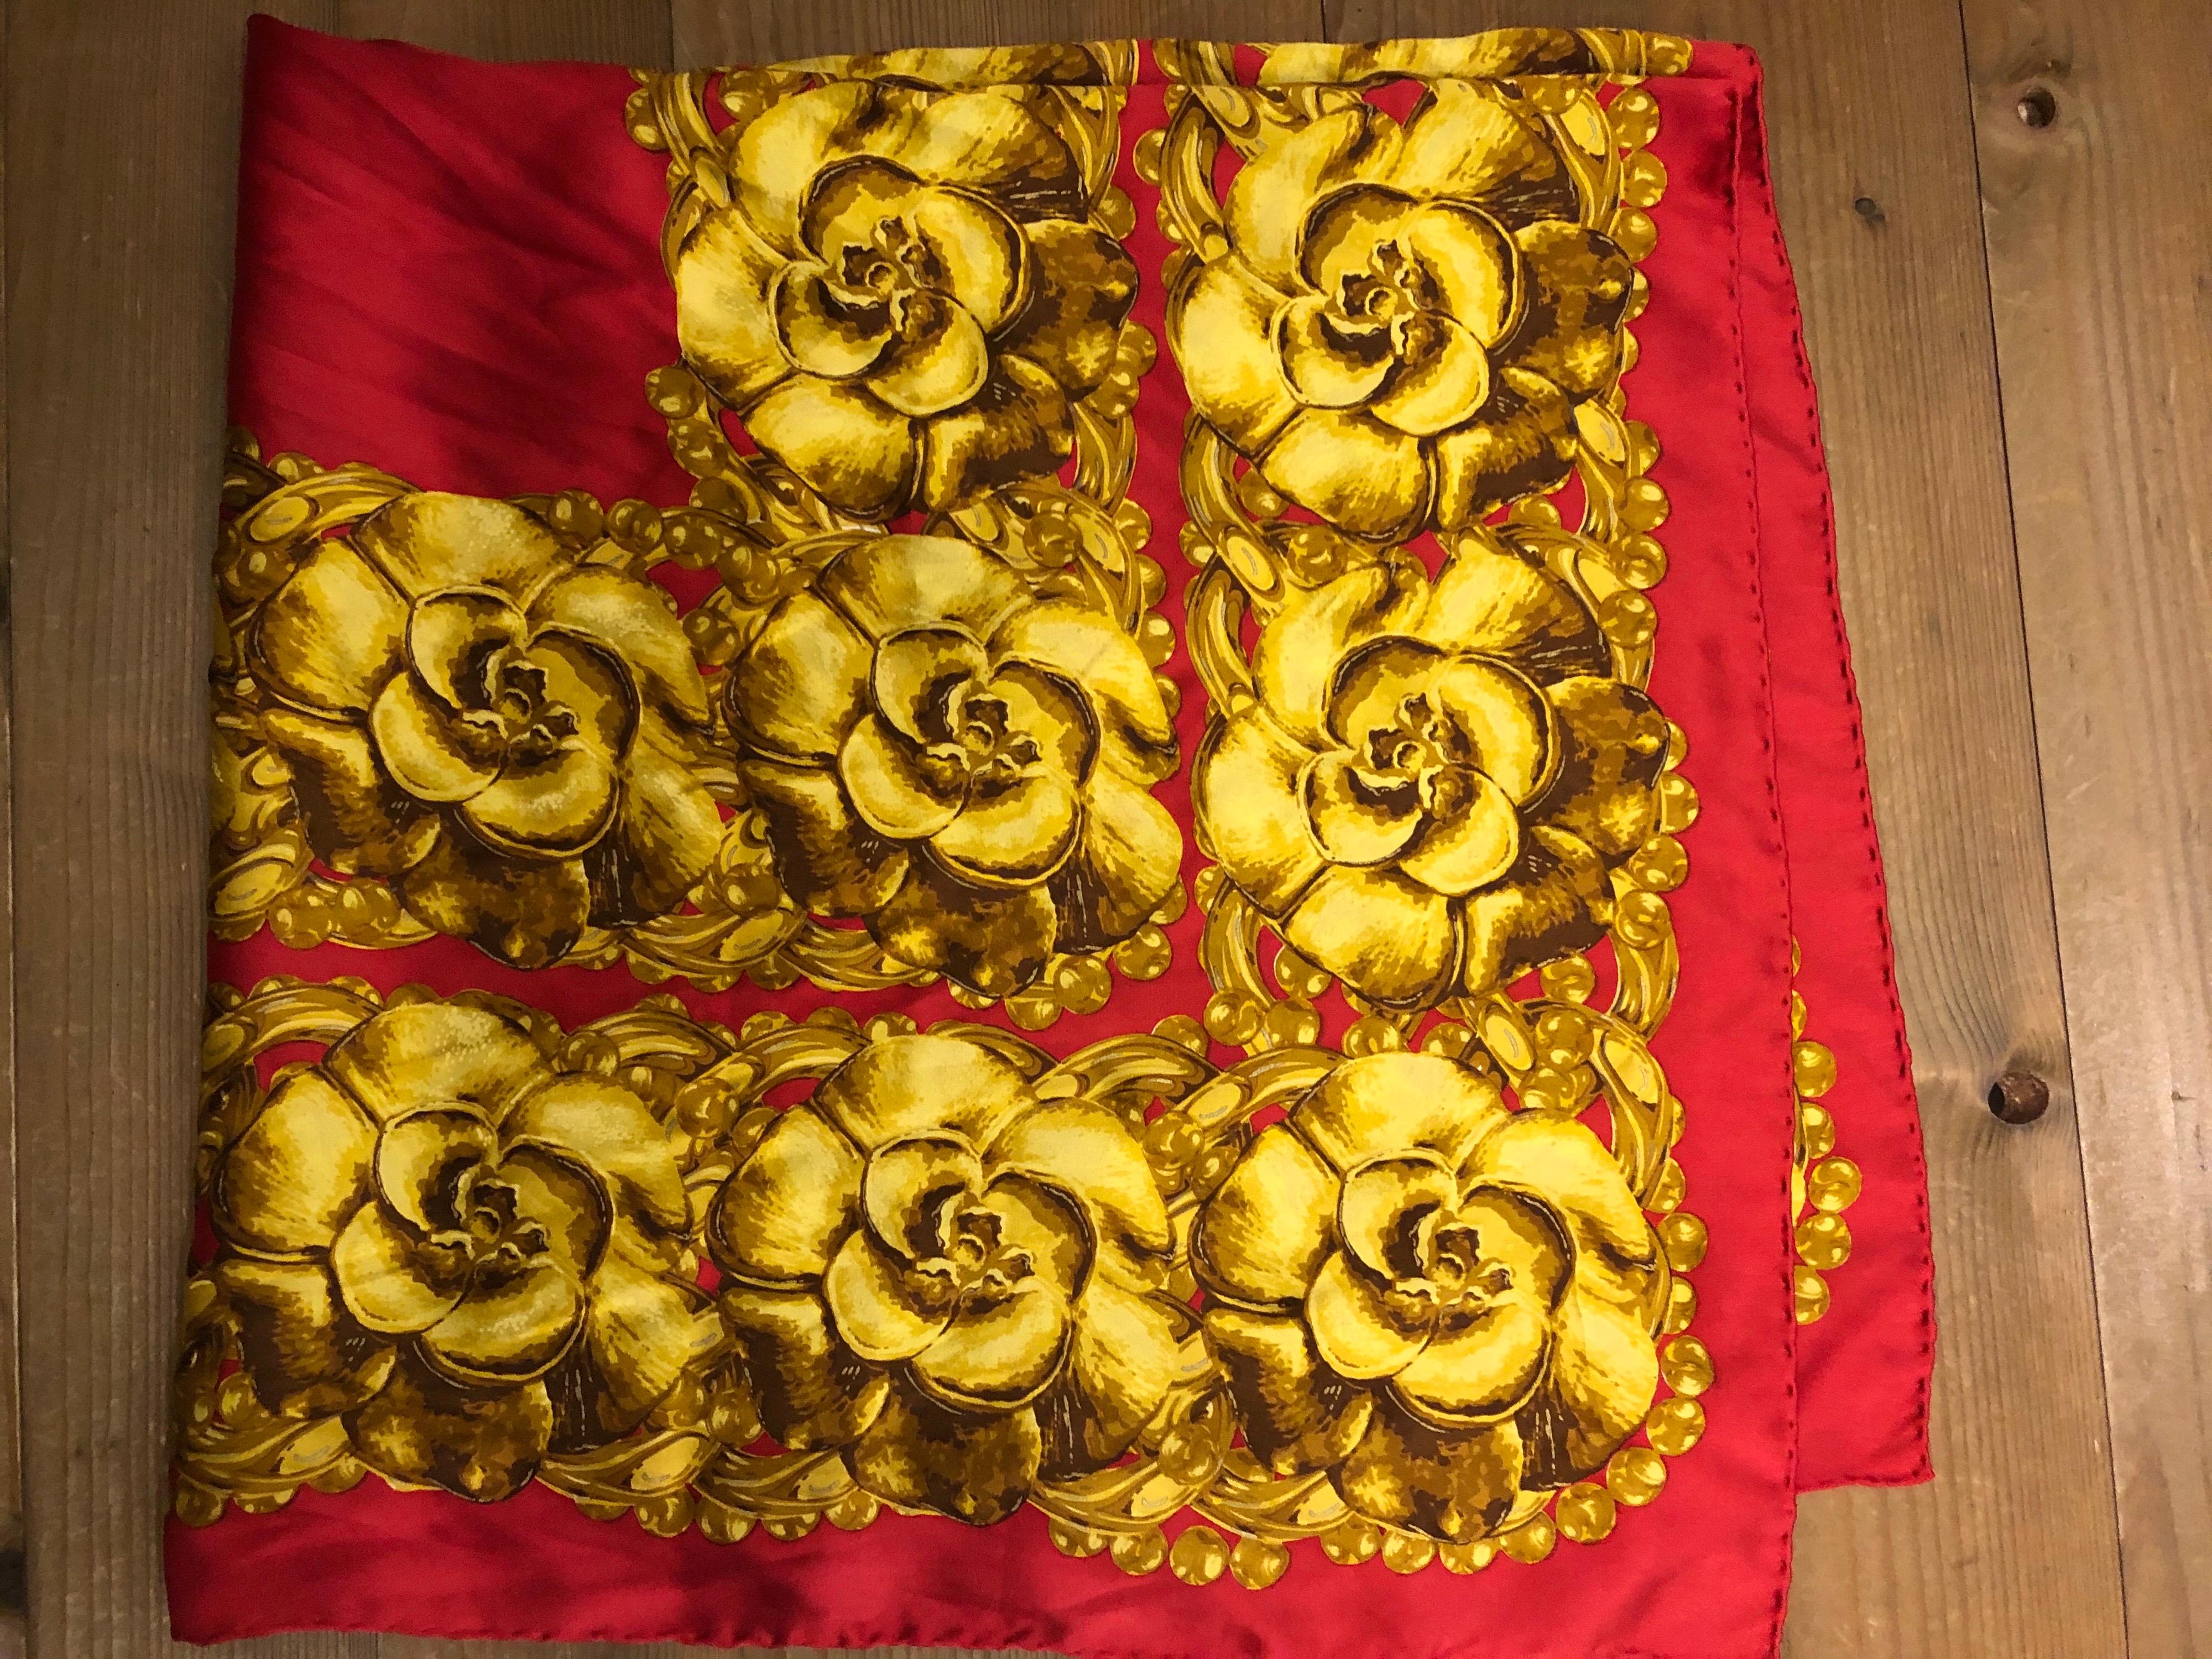 Vintage Chanel red silk scarf featuring iconic Chanel camellia print in golden yellow color. It was featured in Vogue 1990 September issue. Measures 34 x 34 inches. Made in Italy. 

Condition: Minor signs of wear and no odor. Generally in good